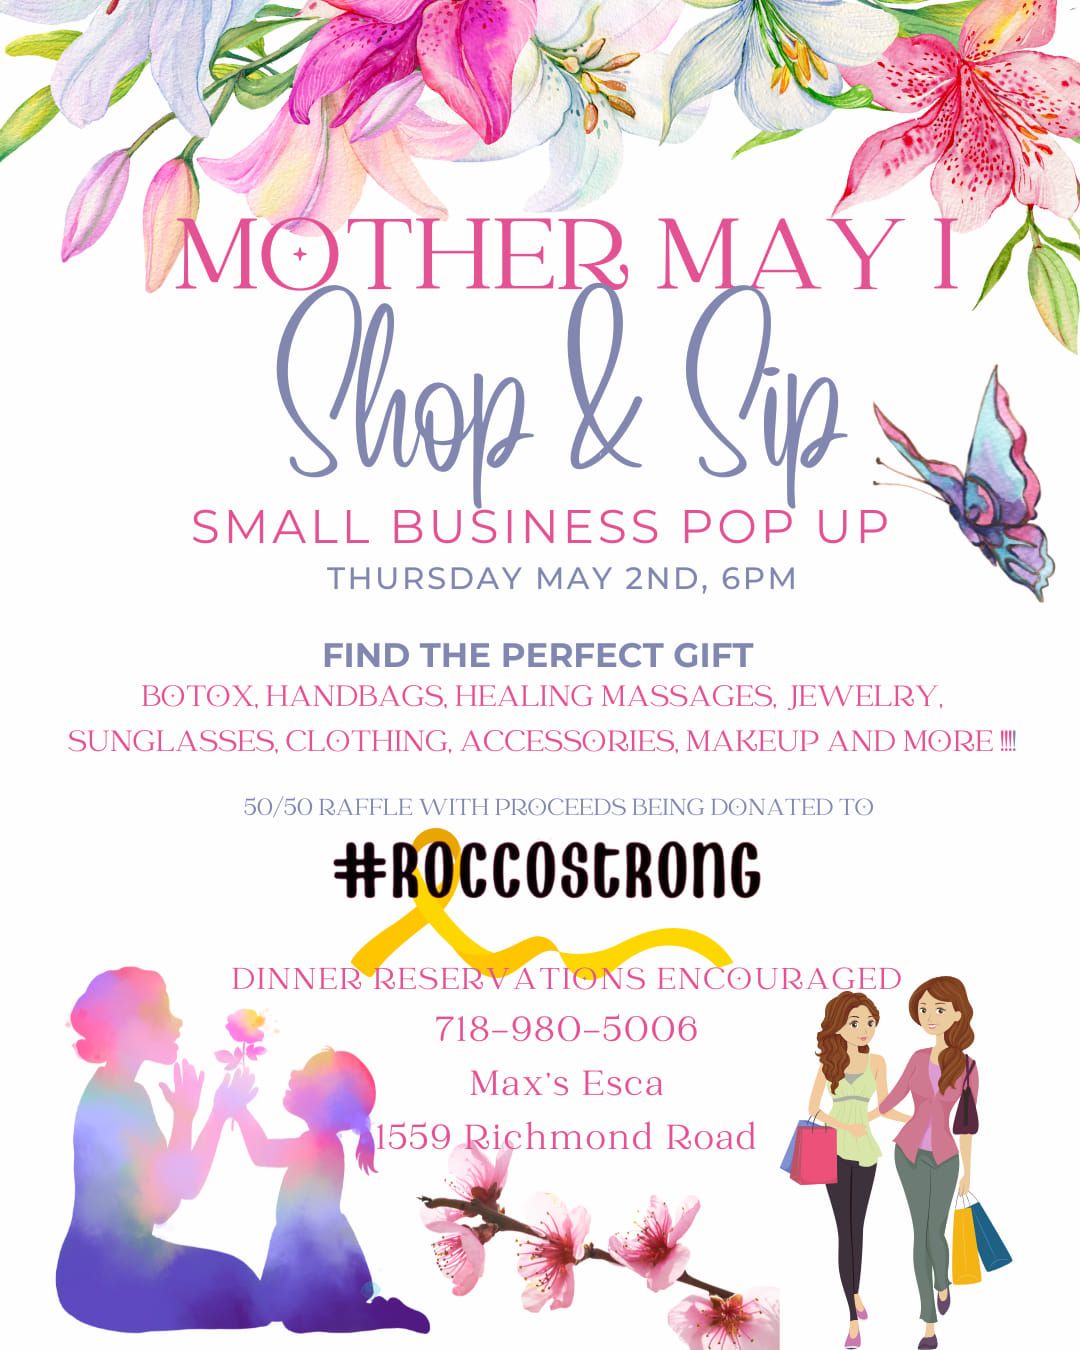 Mother May I Shop - Small Business Pop Up